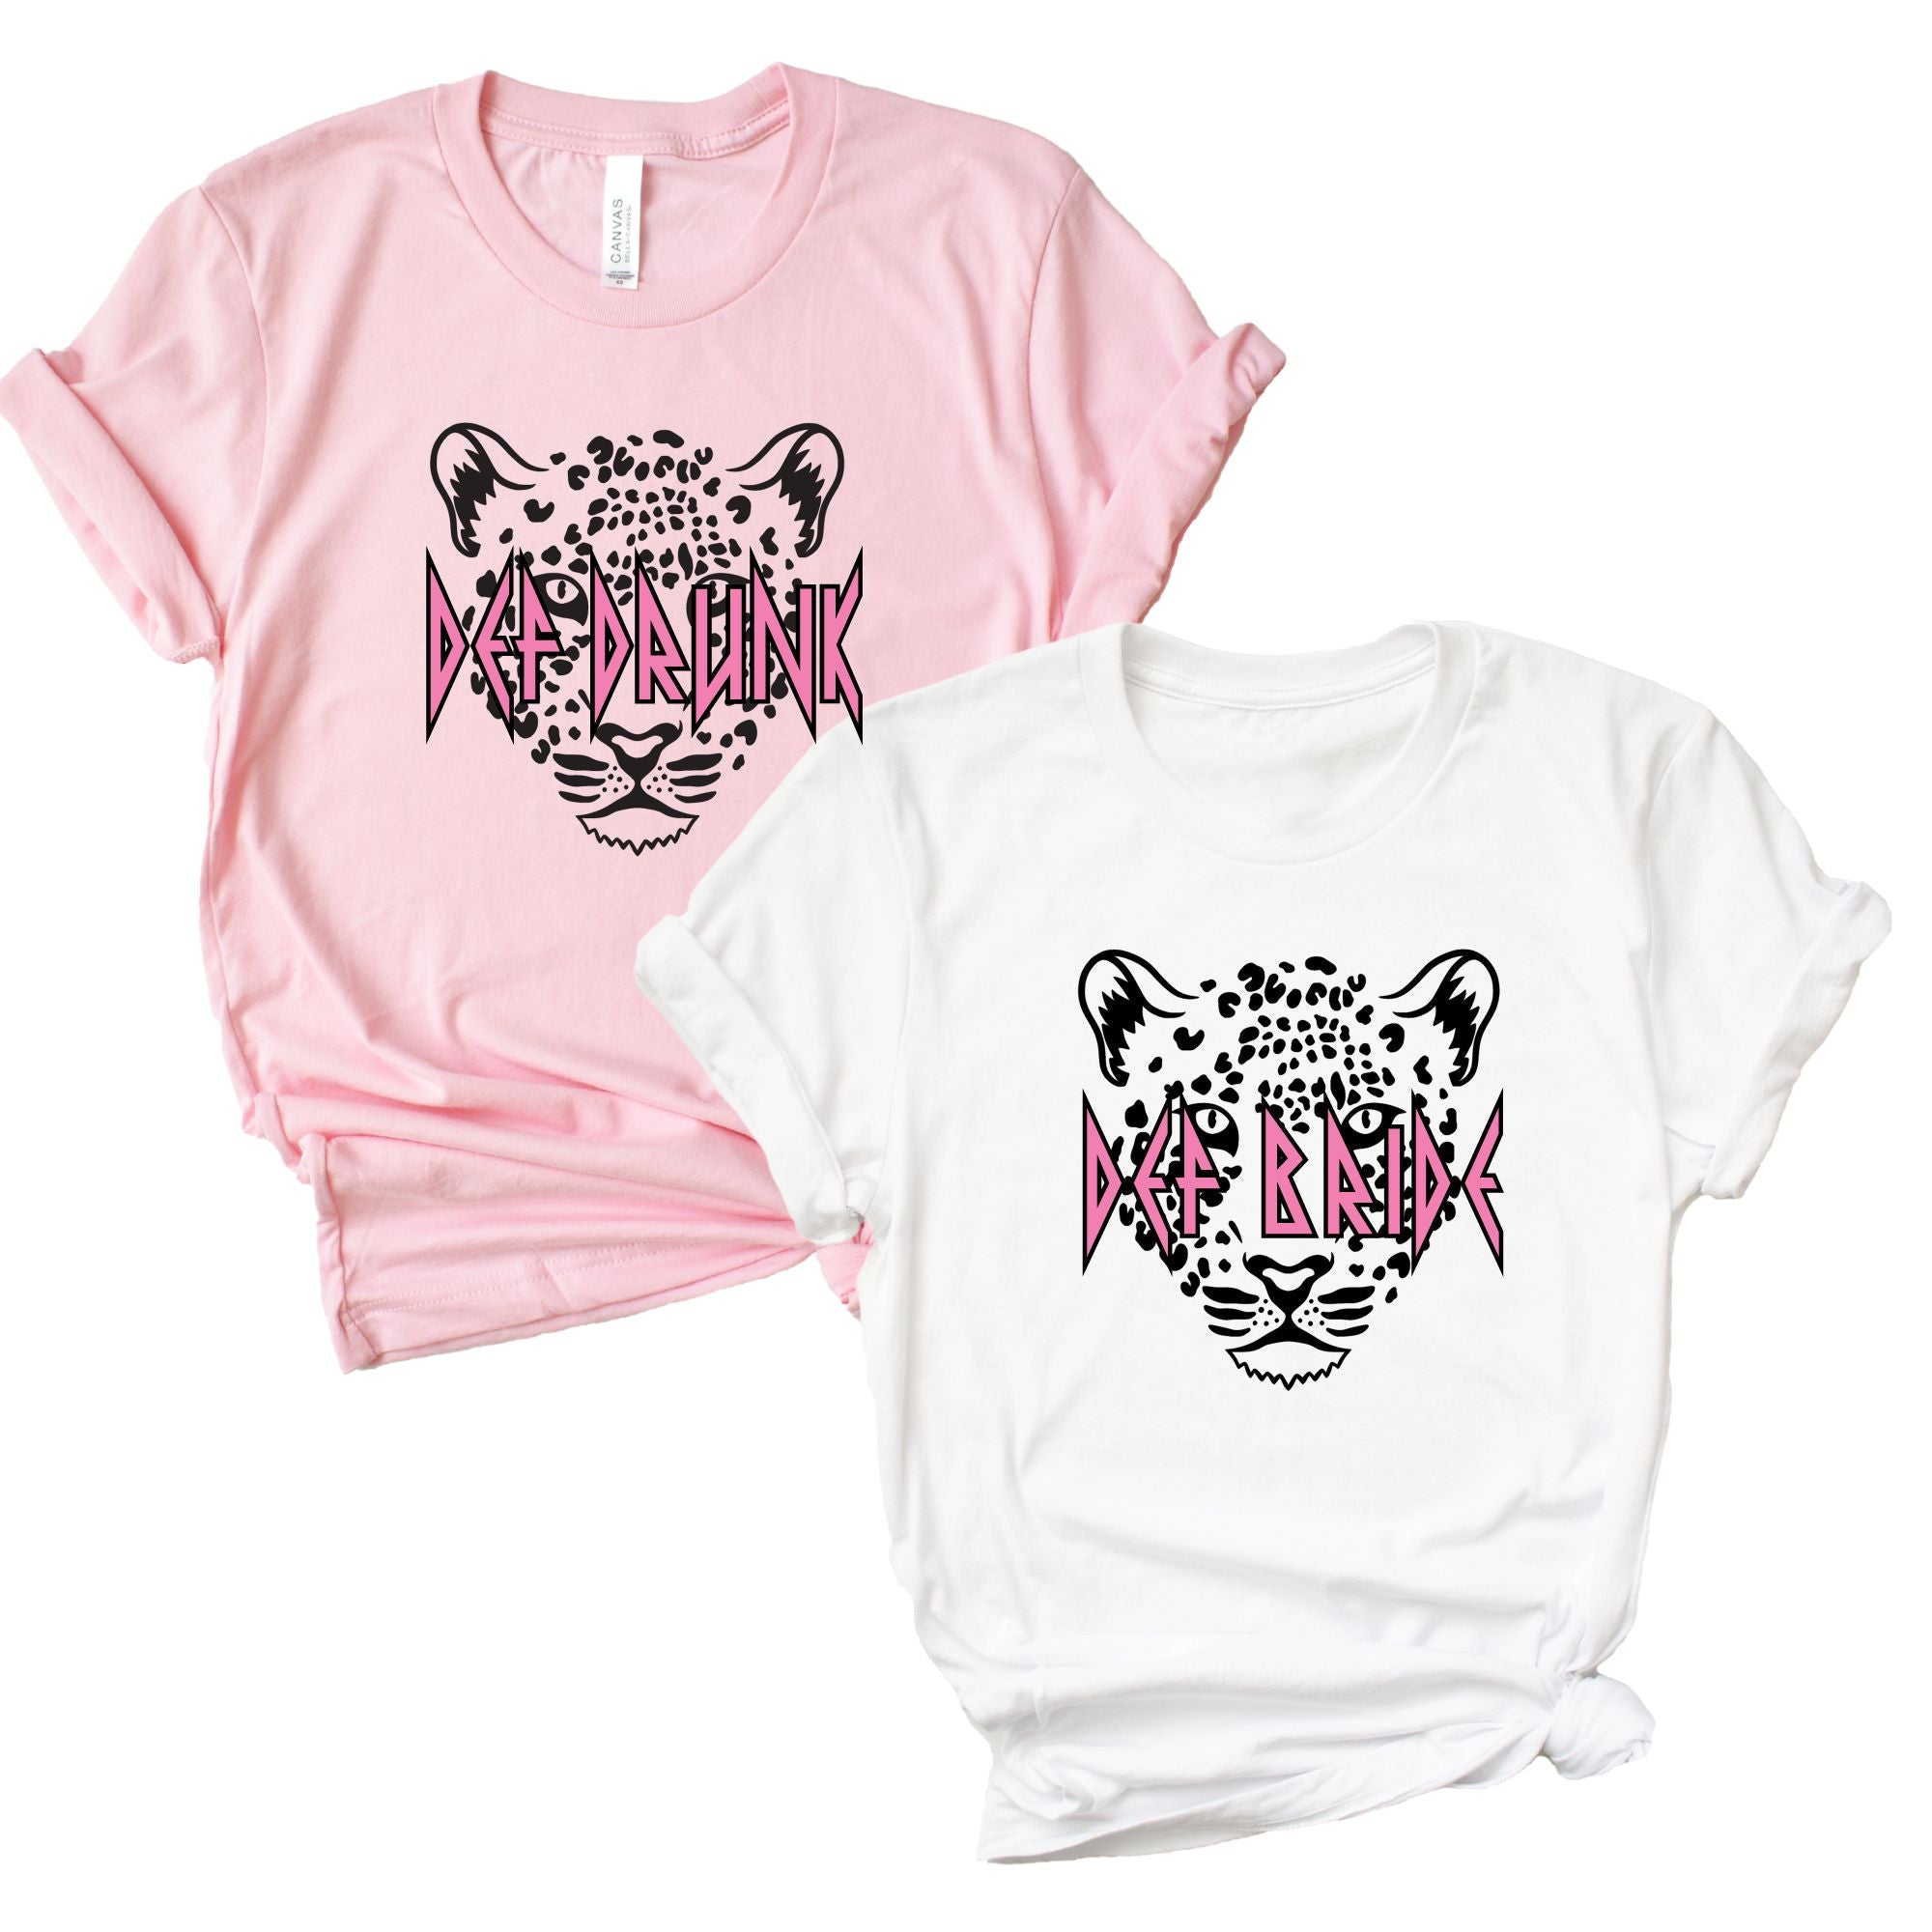 Def Bride / Def Drunk Graphic Shirt - Sprinkled With Pink #bachelorette #custom #gifts